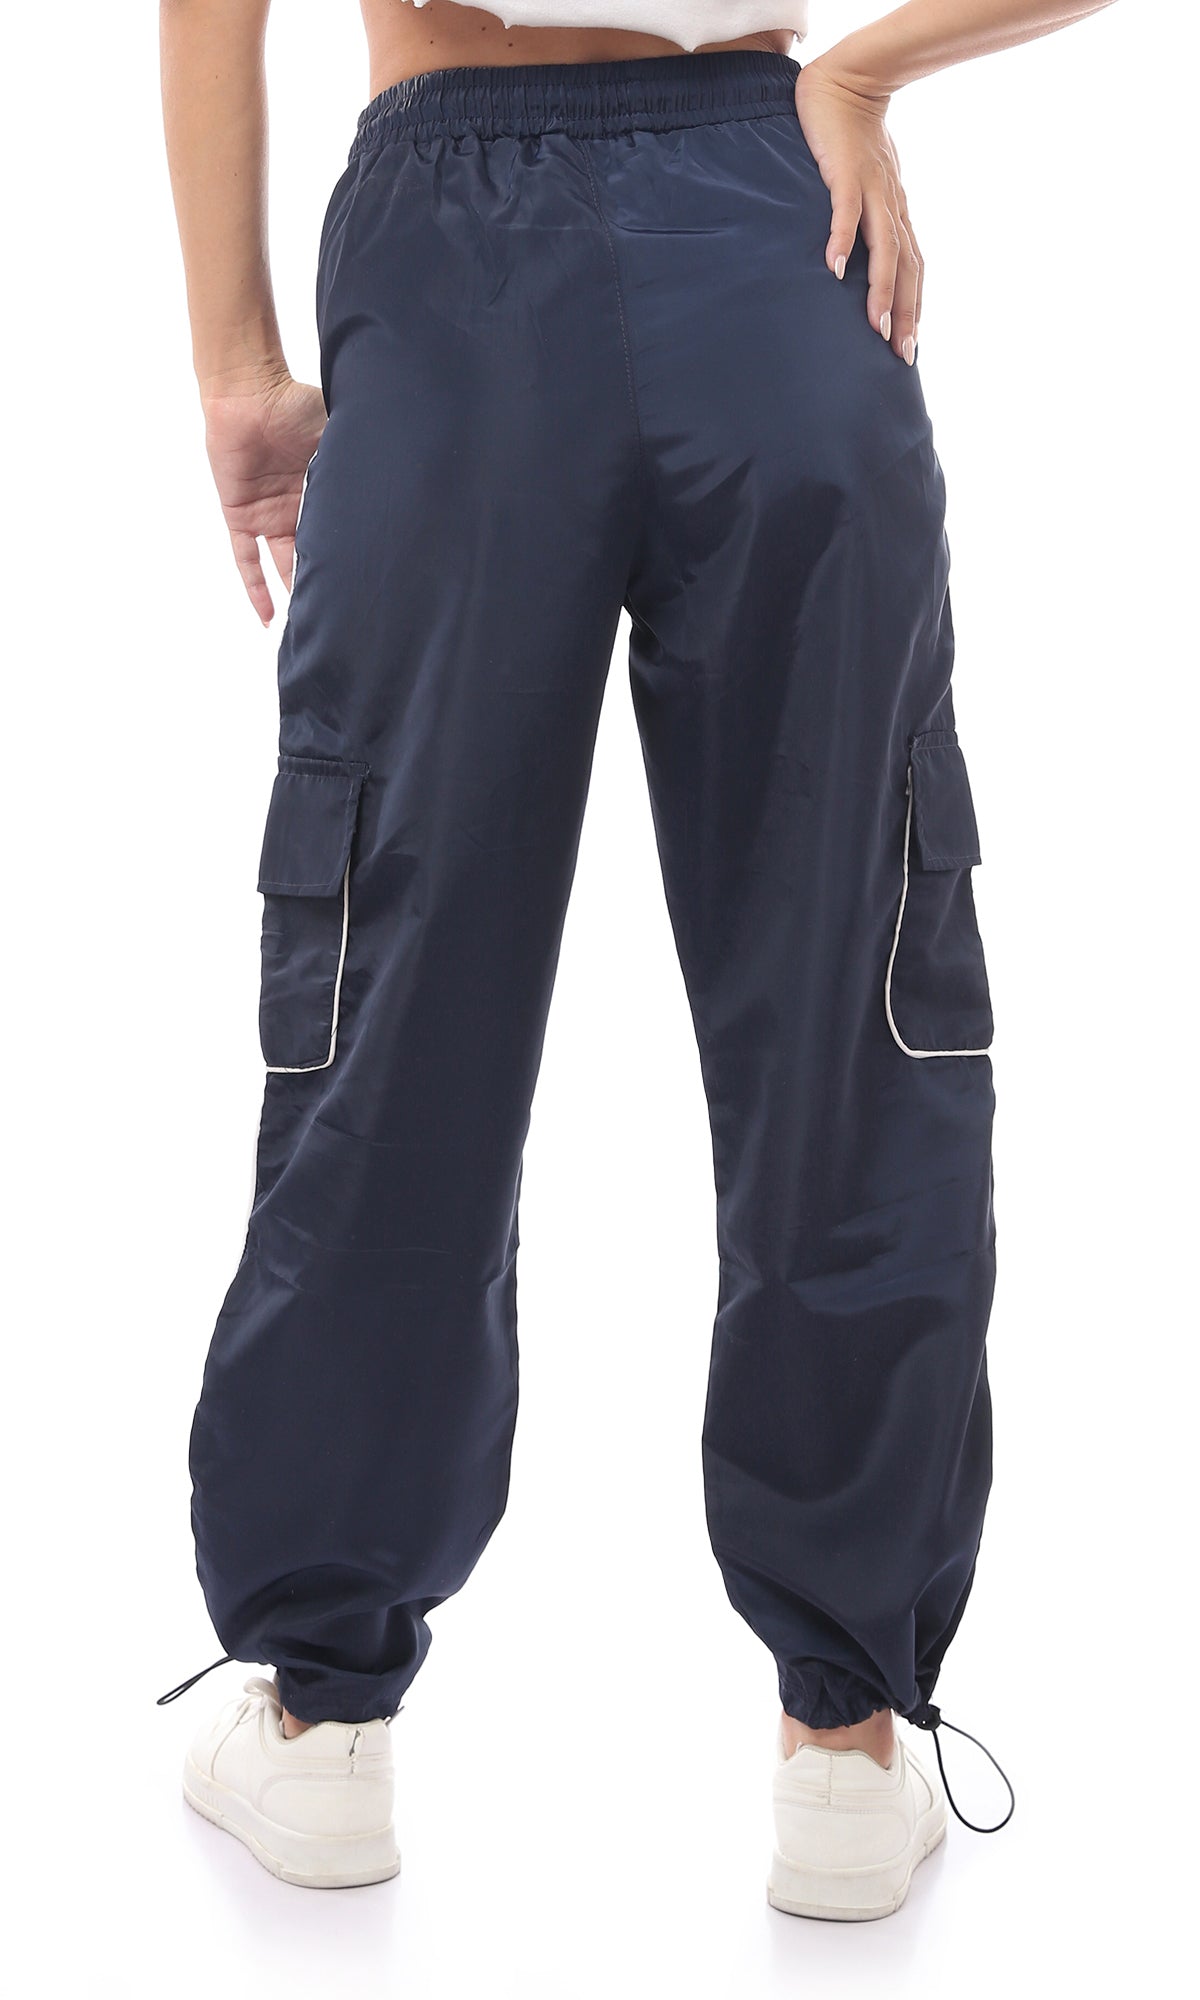 O170608 Slip On Navy Blue Cotton Trousers With Drawstrings